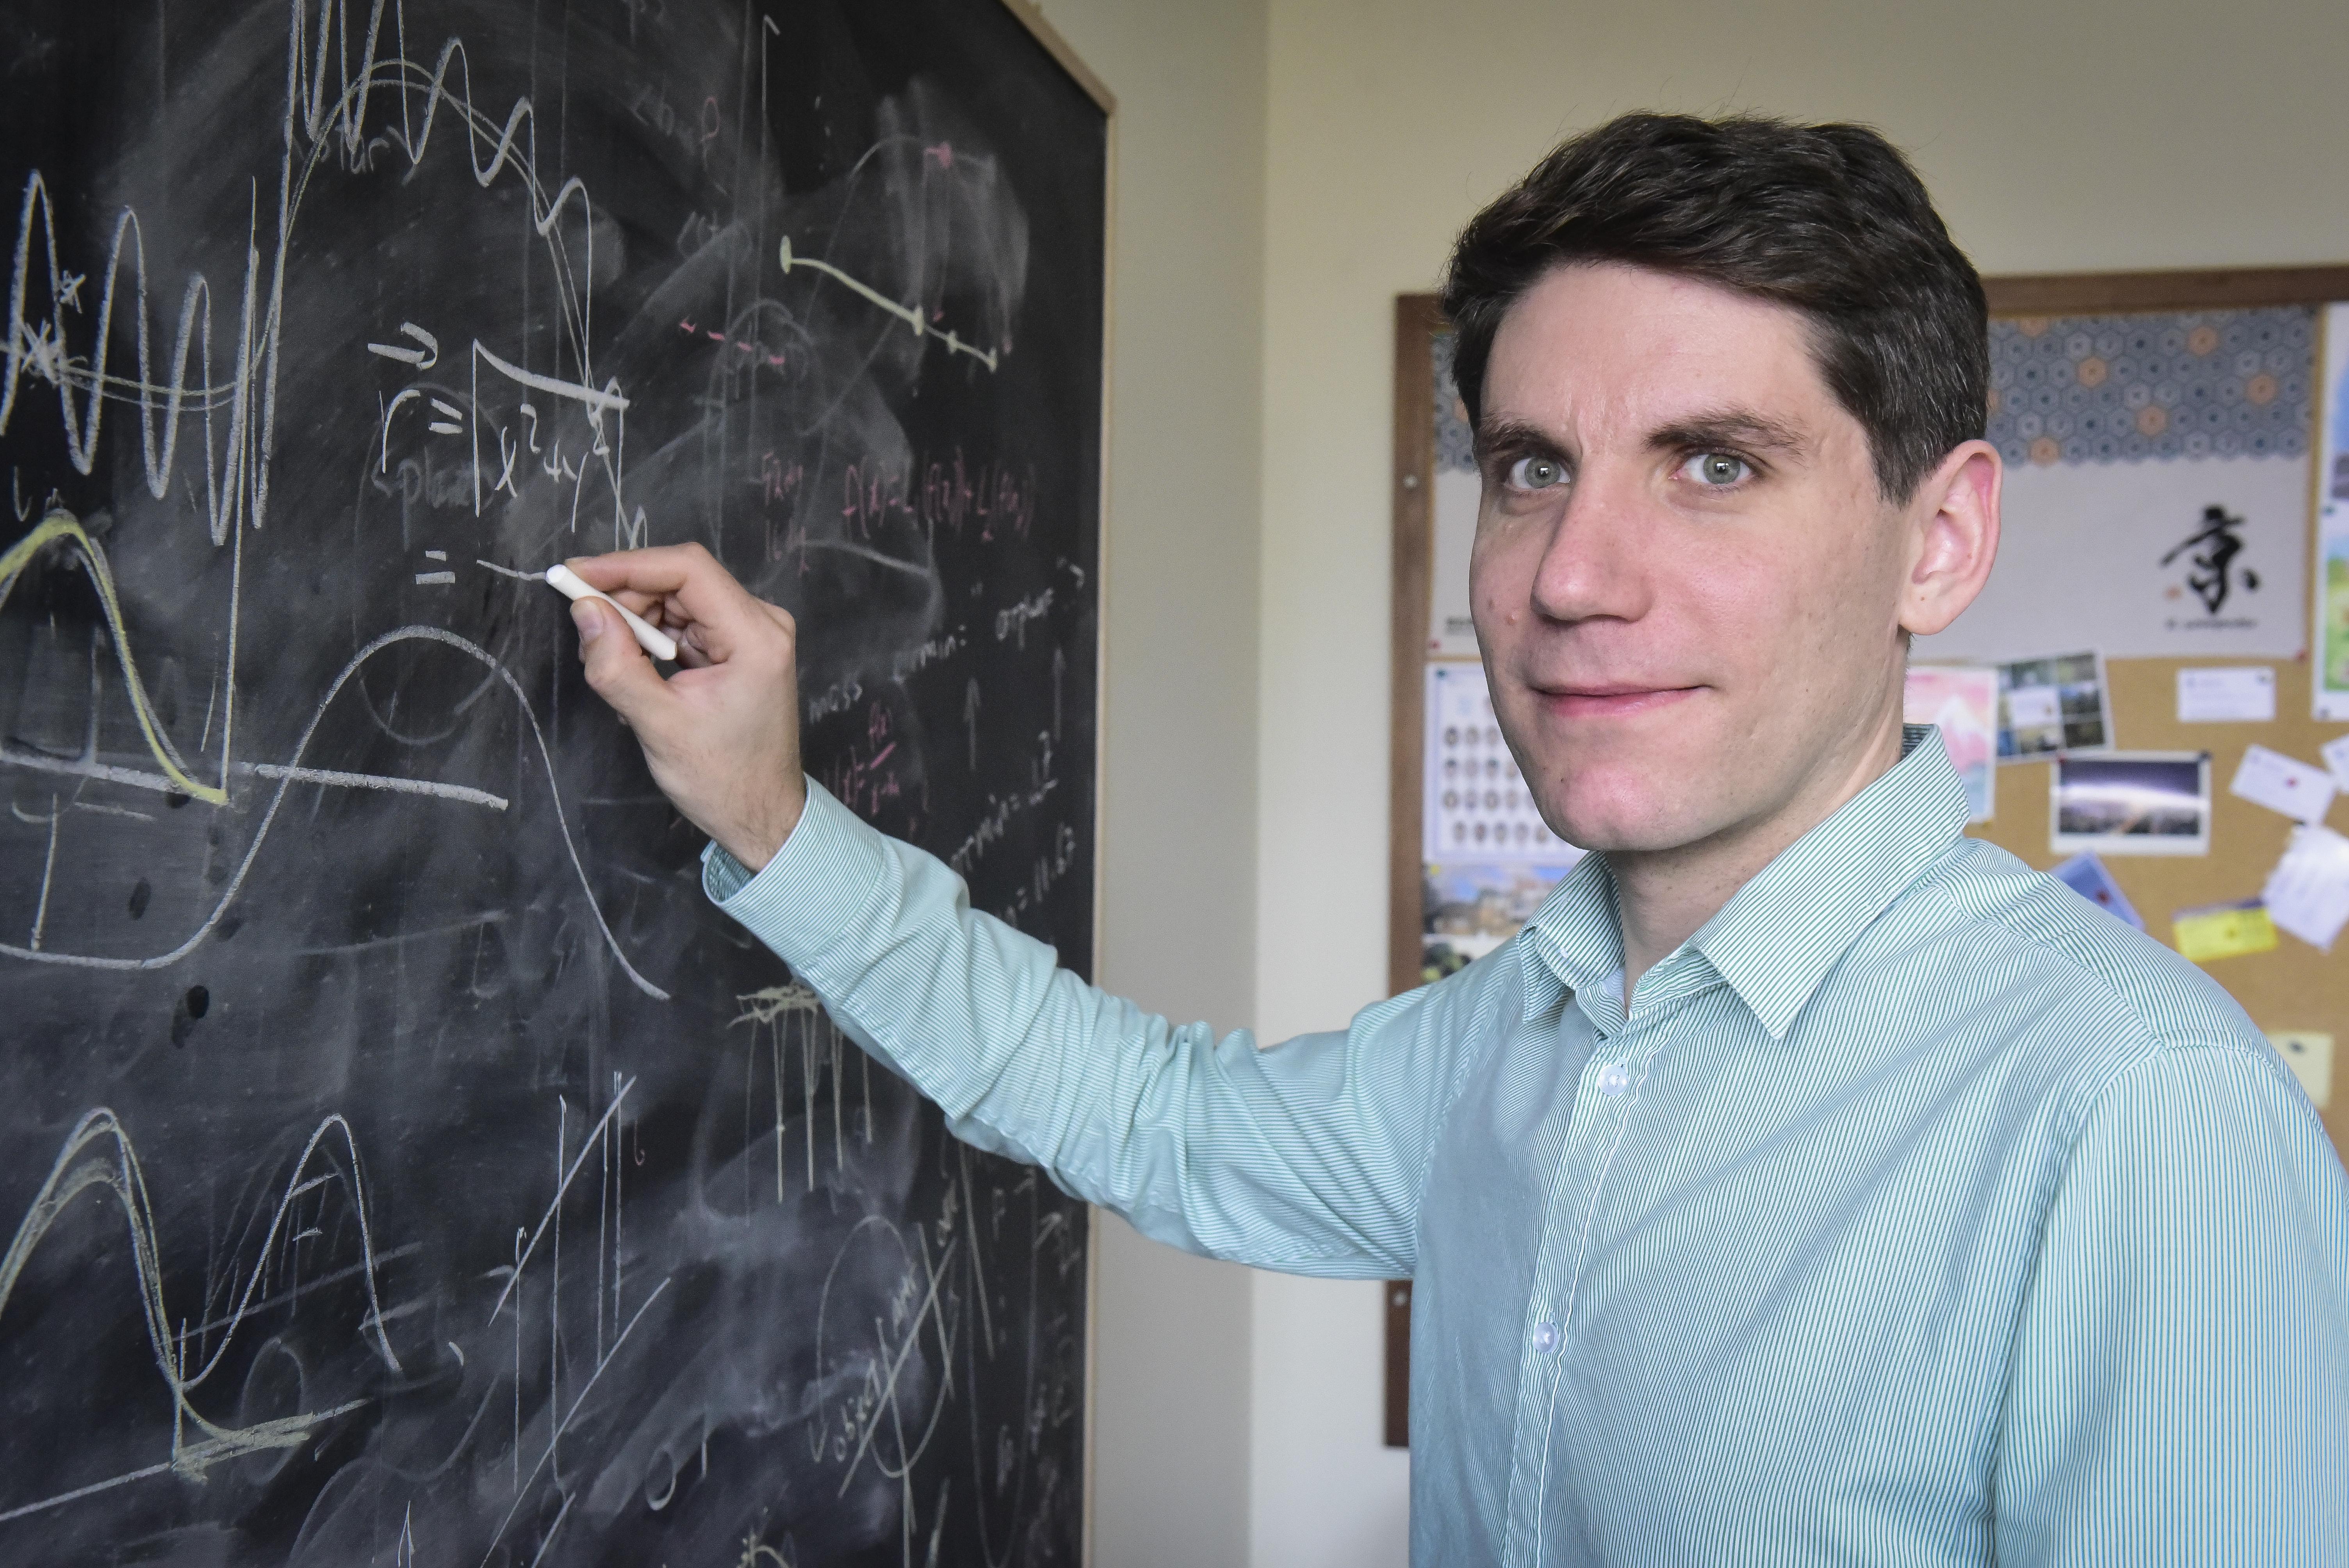 Assistant Professor Hanno Rein becomes the new director of the Centre for Planetary Science at U of T Scarborough.